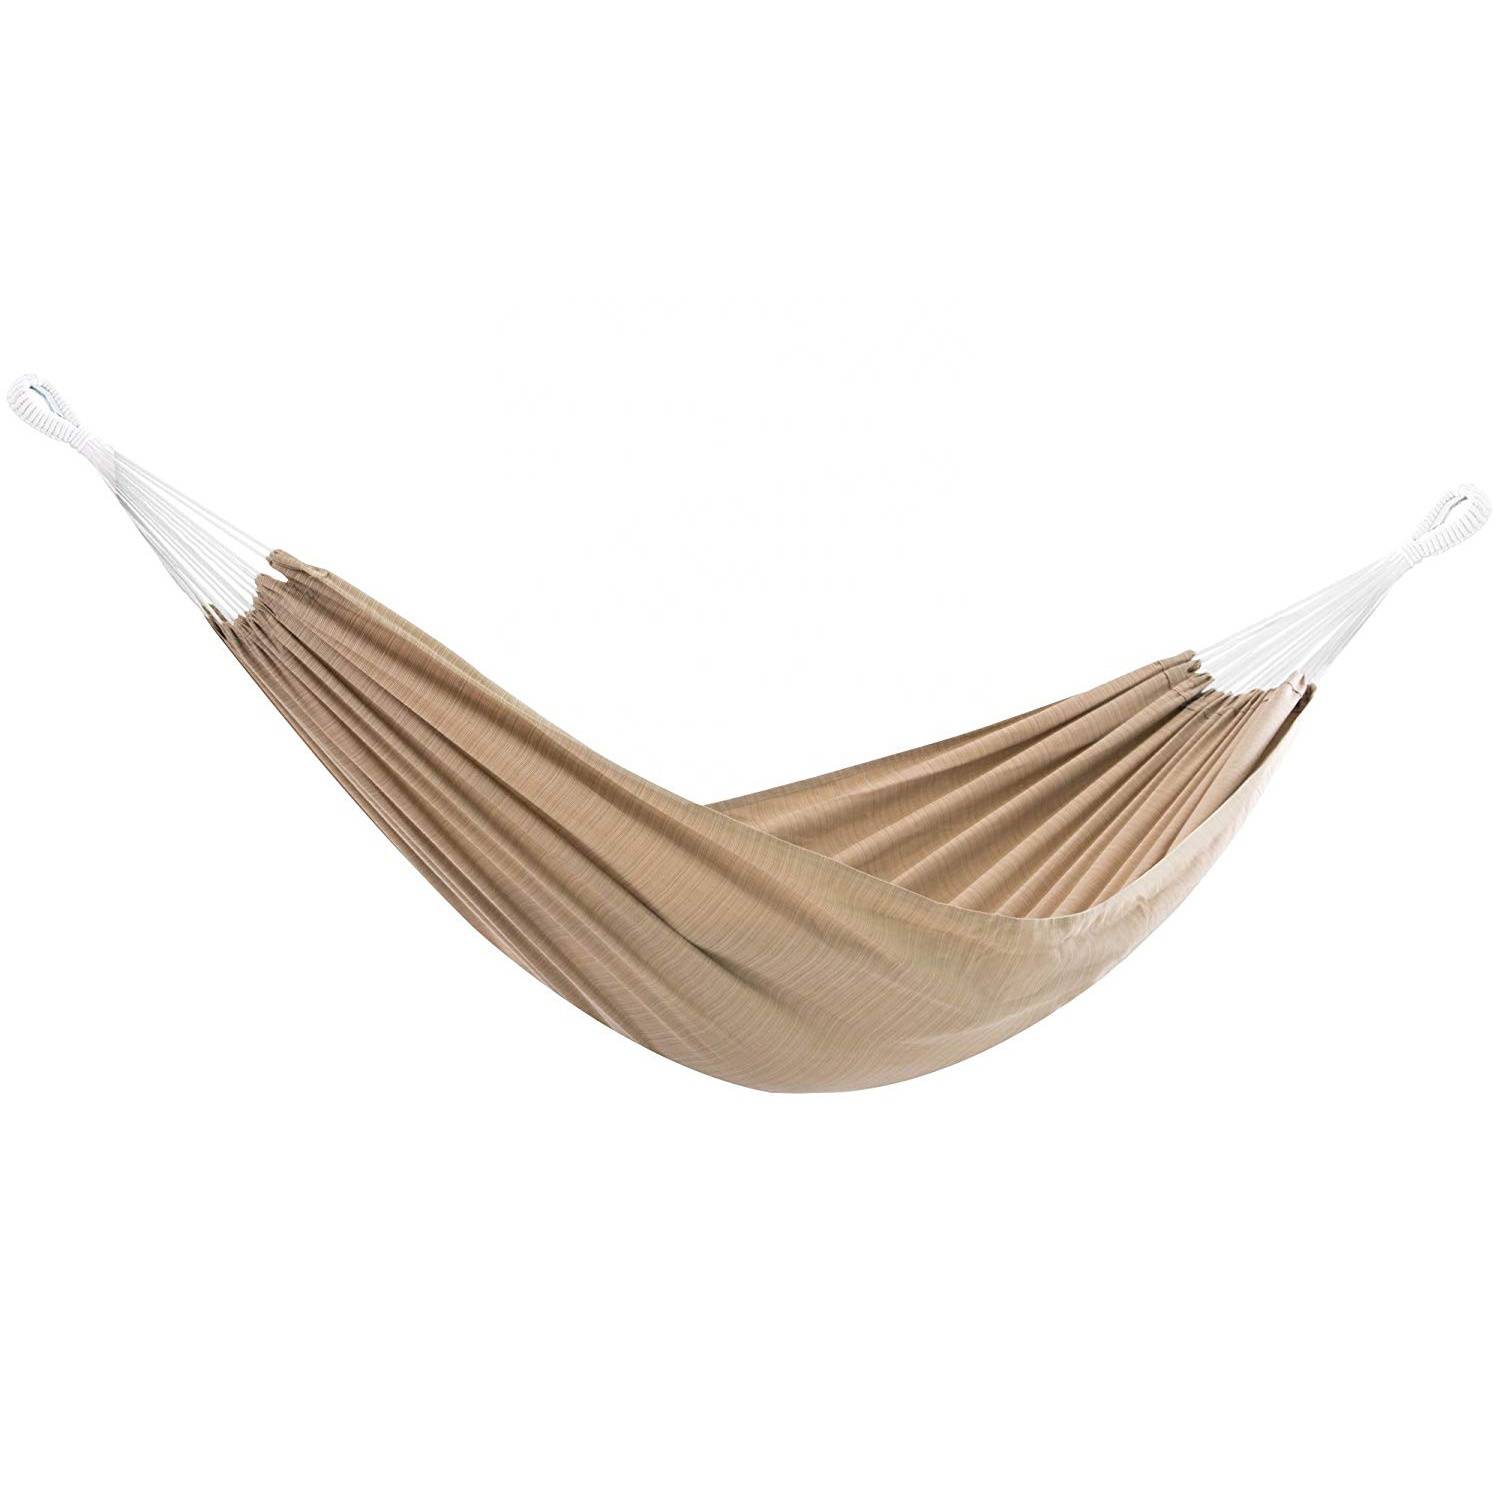 Wholesale Price China Hanging Rope Chair Swing - polycotton hammock outdoor camping hammock swing hammock – Top Asian